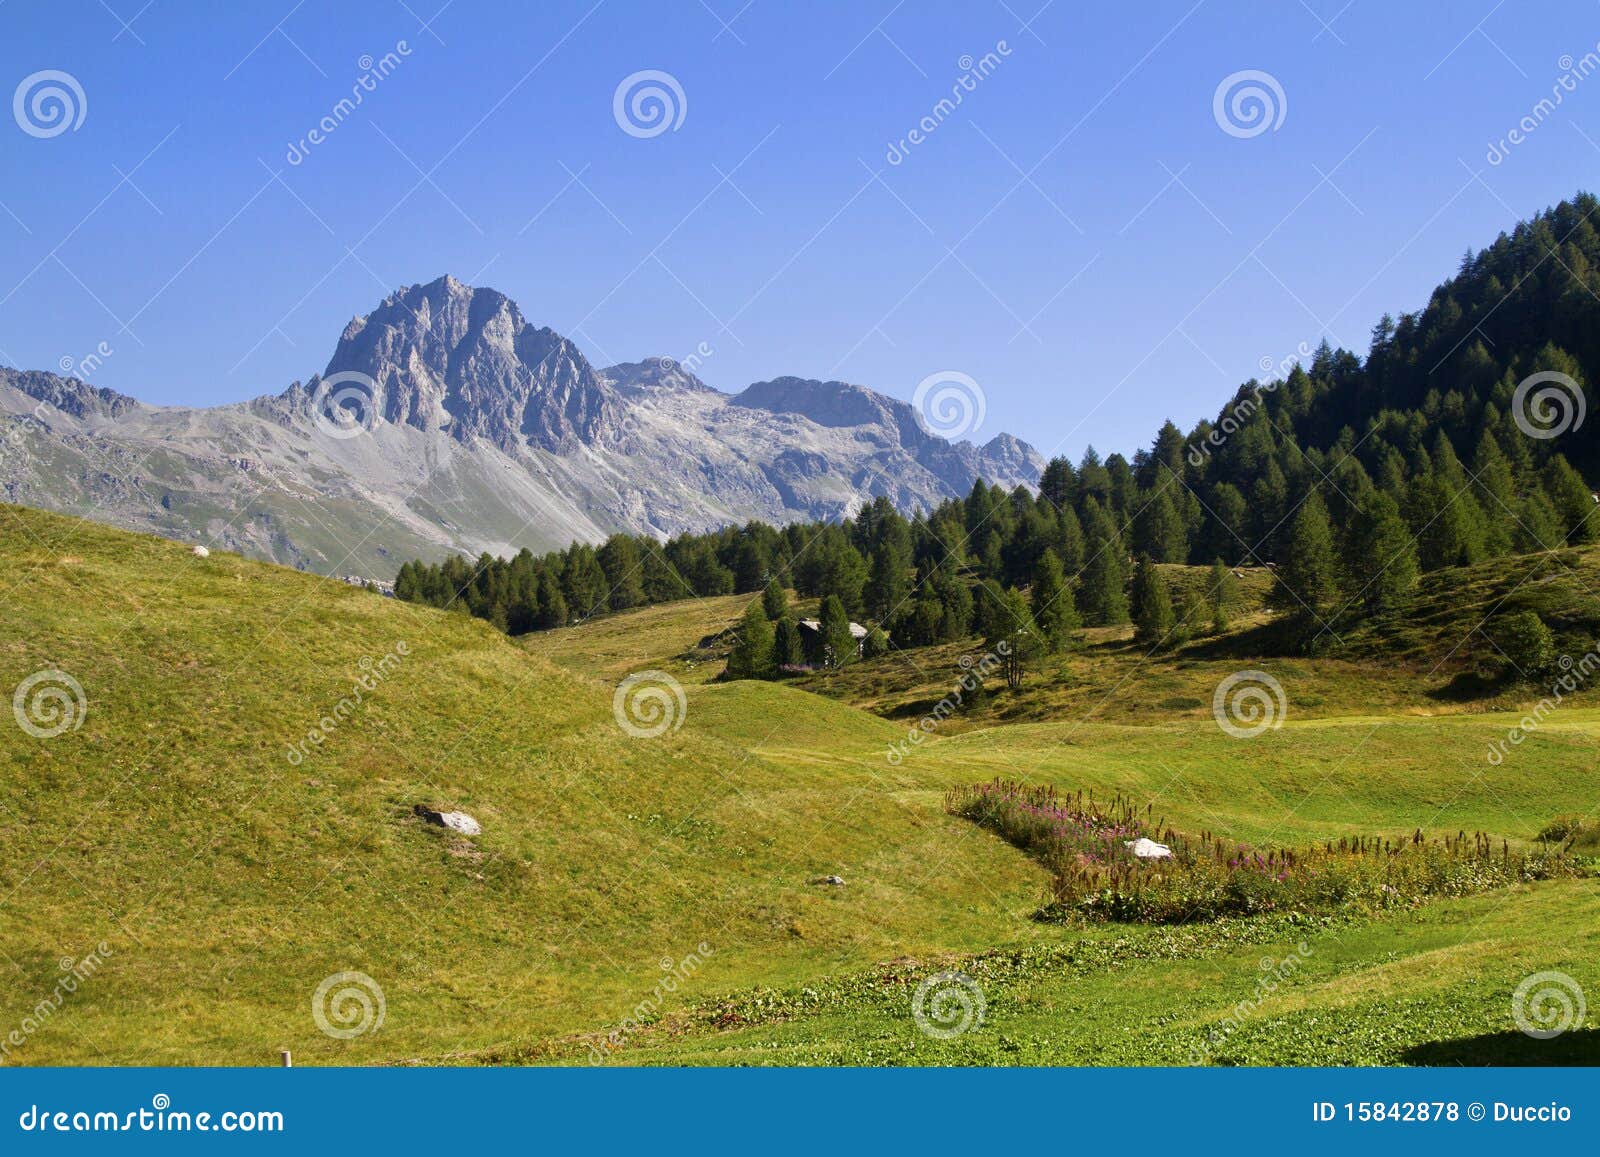 Montagne svizzere. Swiss mountains and meadows with huts typical